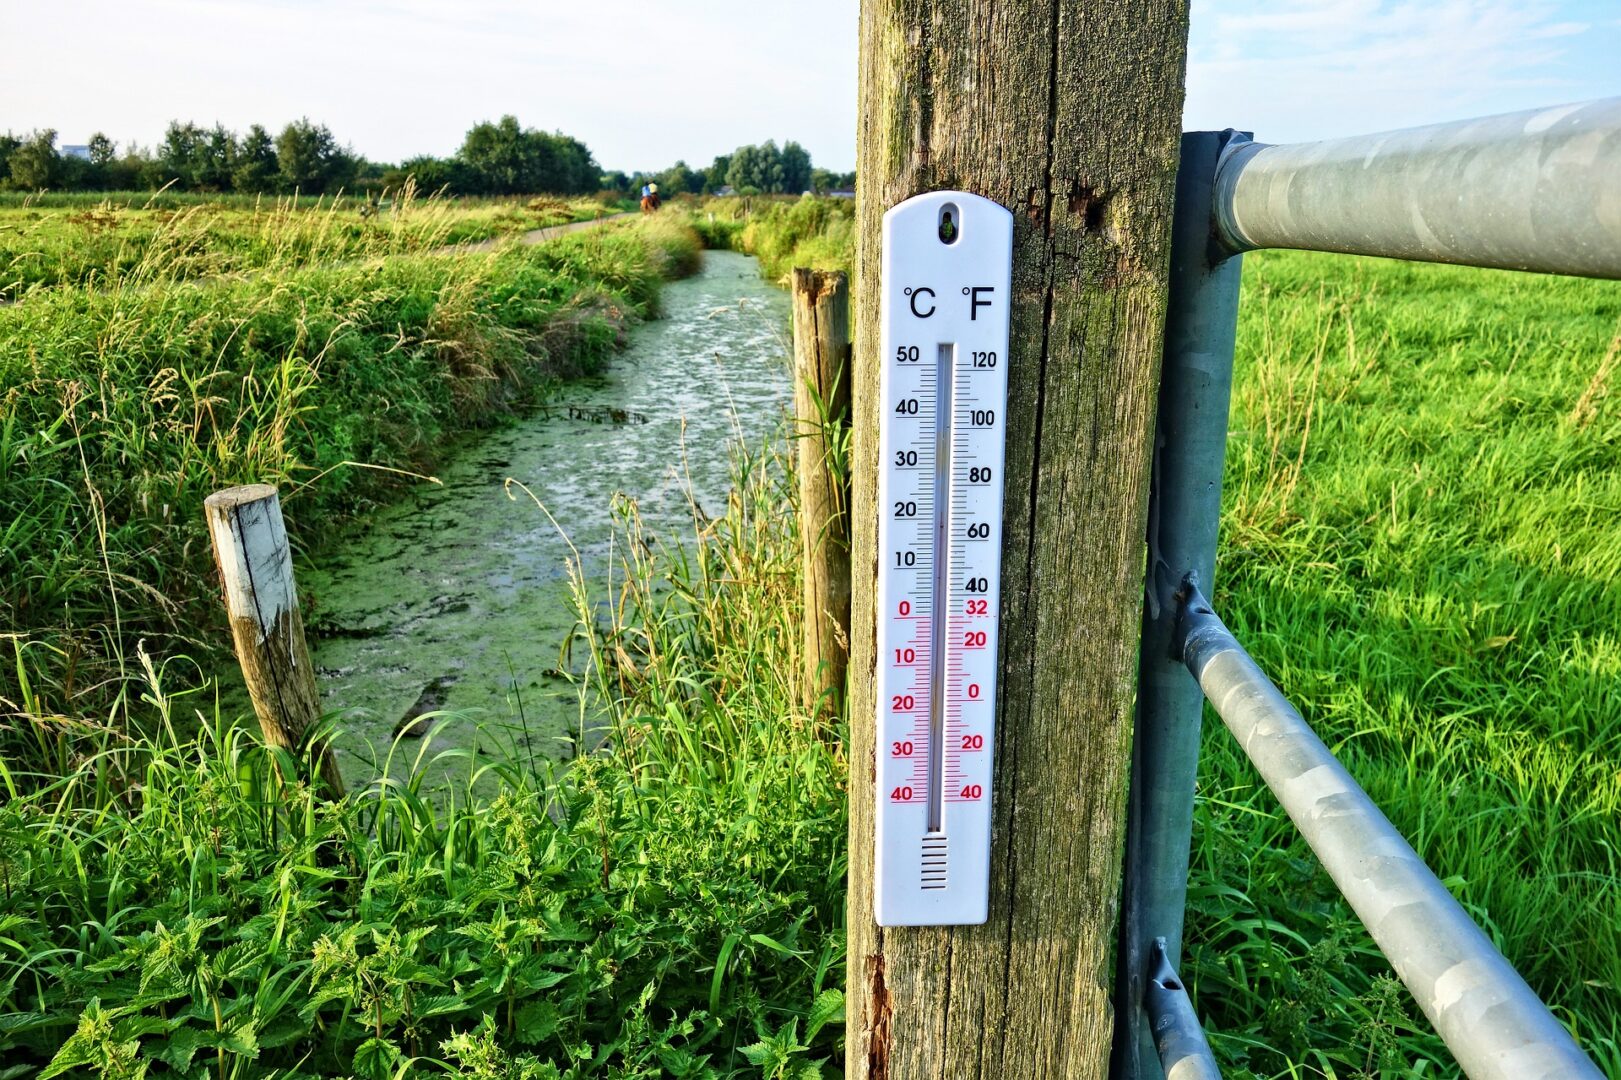 A fence thermometer in the middle of a wet field